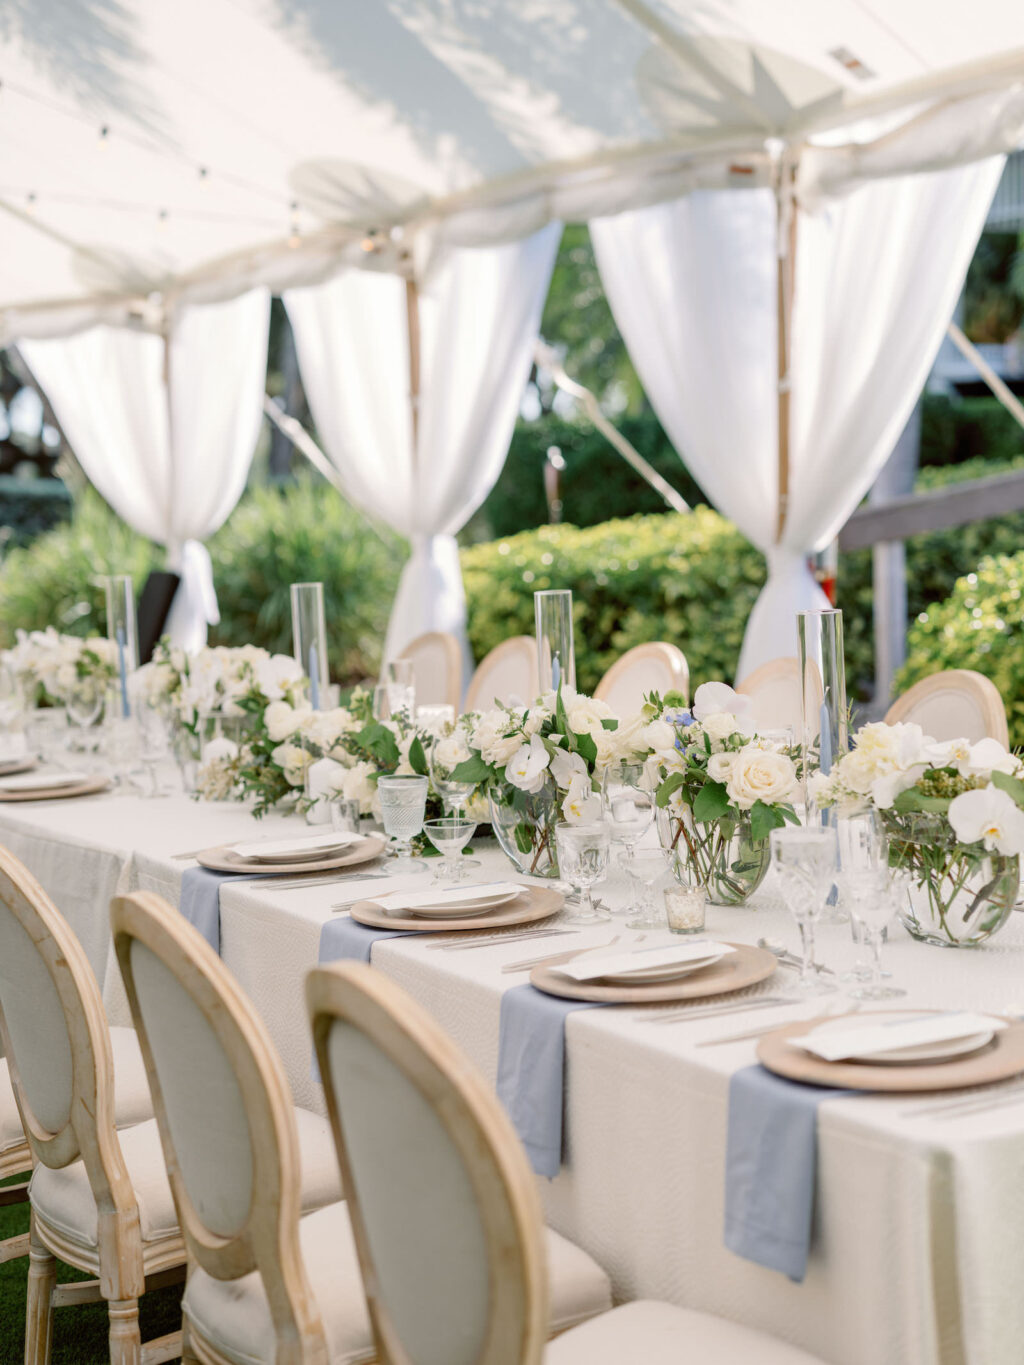 Luxurious Outdoor Tented Reception at Harbourside Lawn | Florida Wedding Venue The Resort at Longboat Key Club